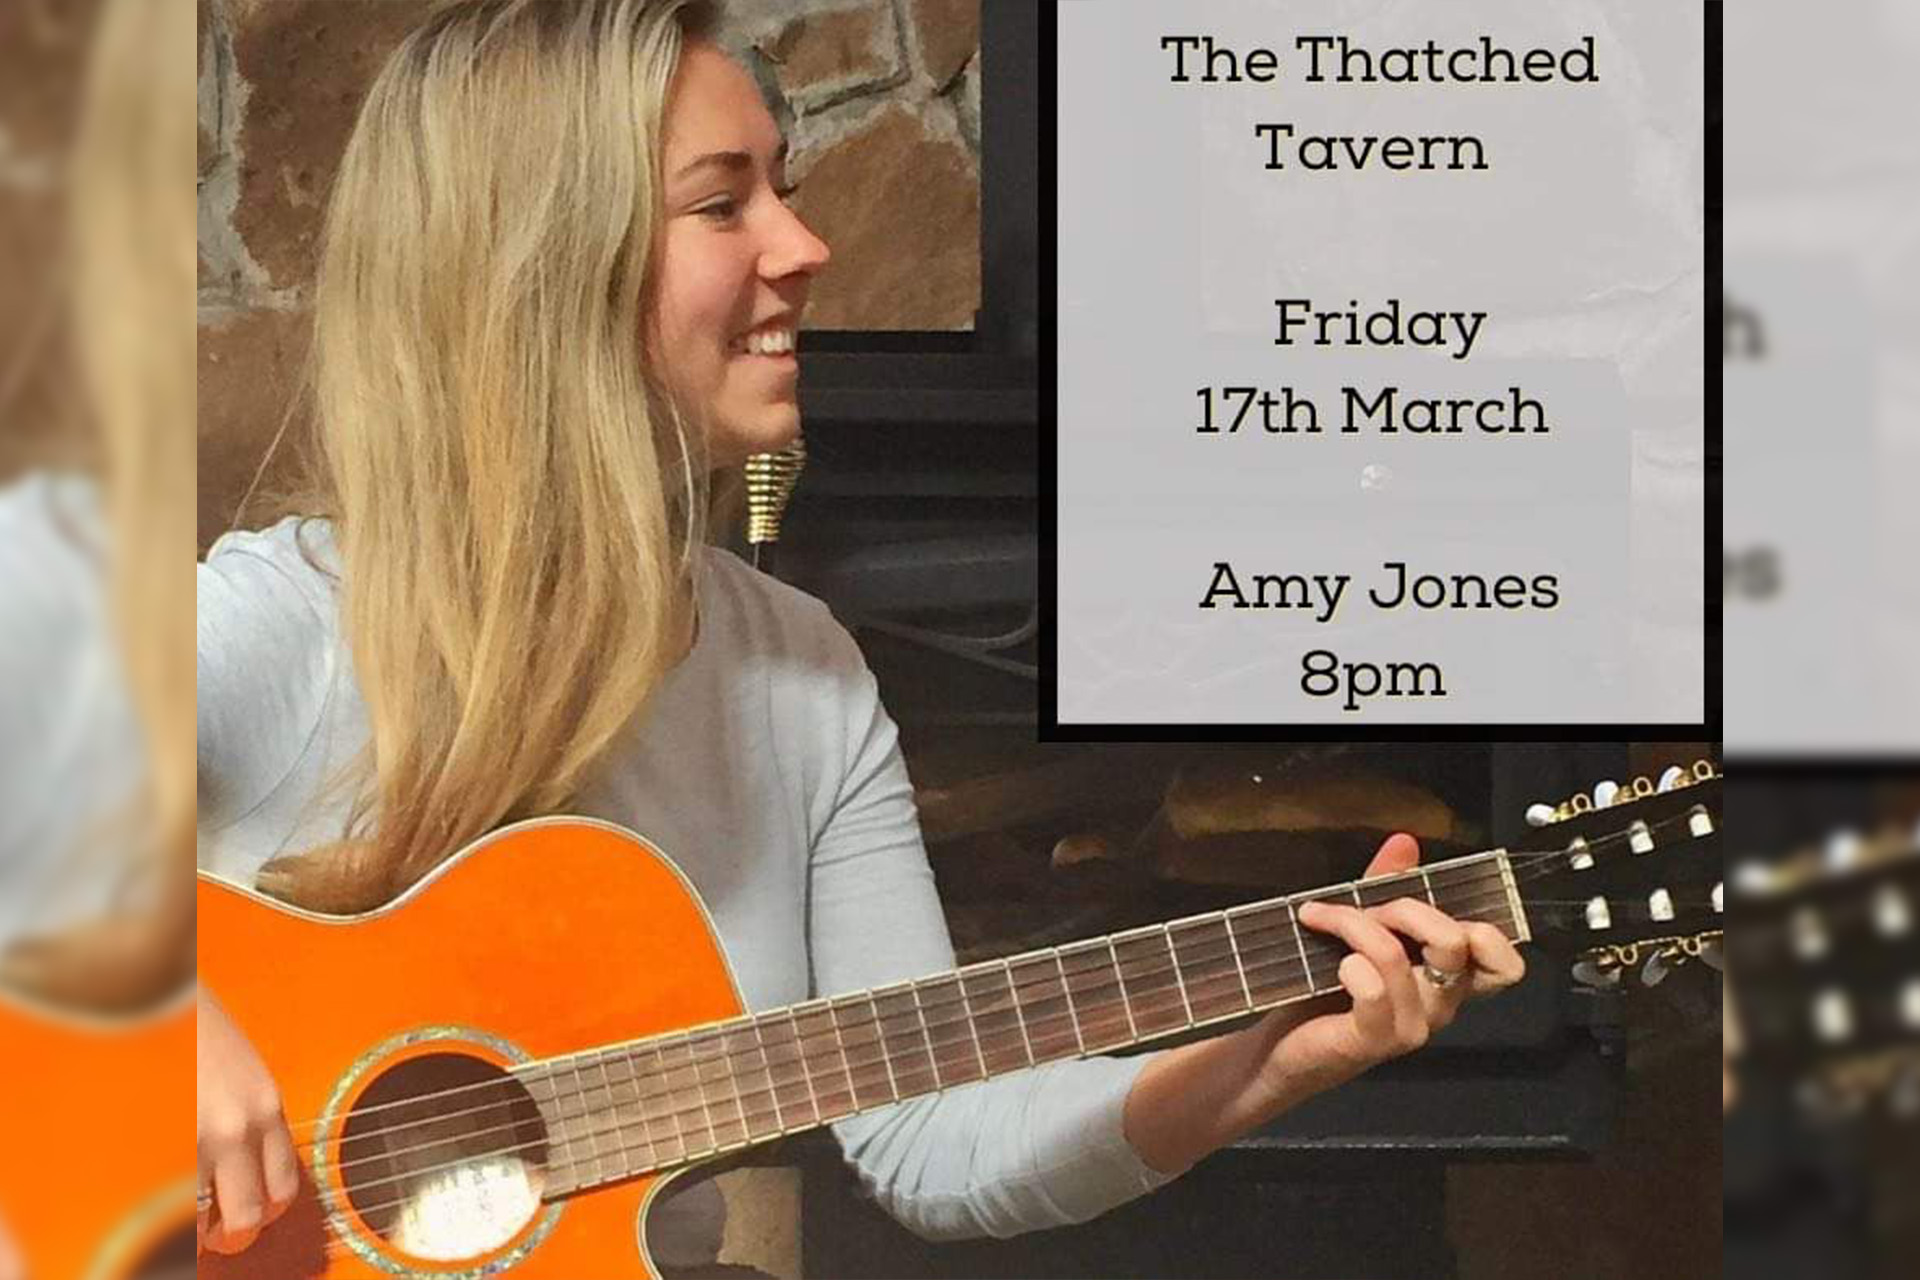 Live Music by Amy Jones at The Thatched Tavern Honeybourne - Friday 17th March from 8pm